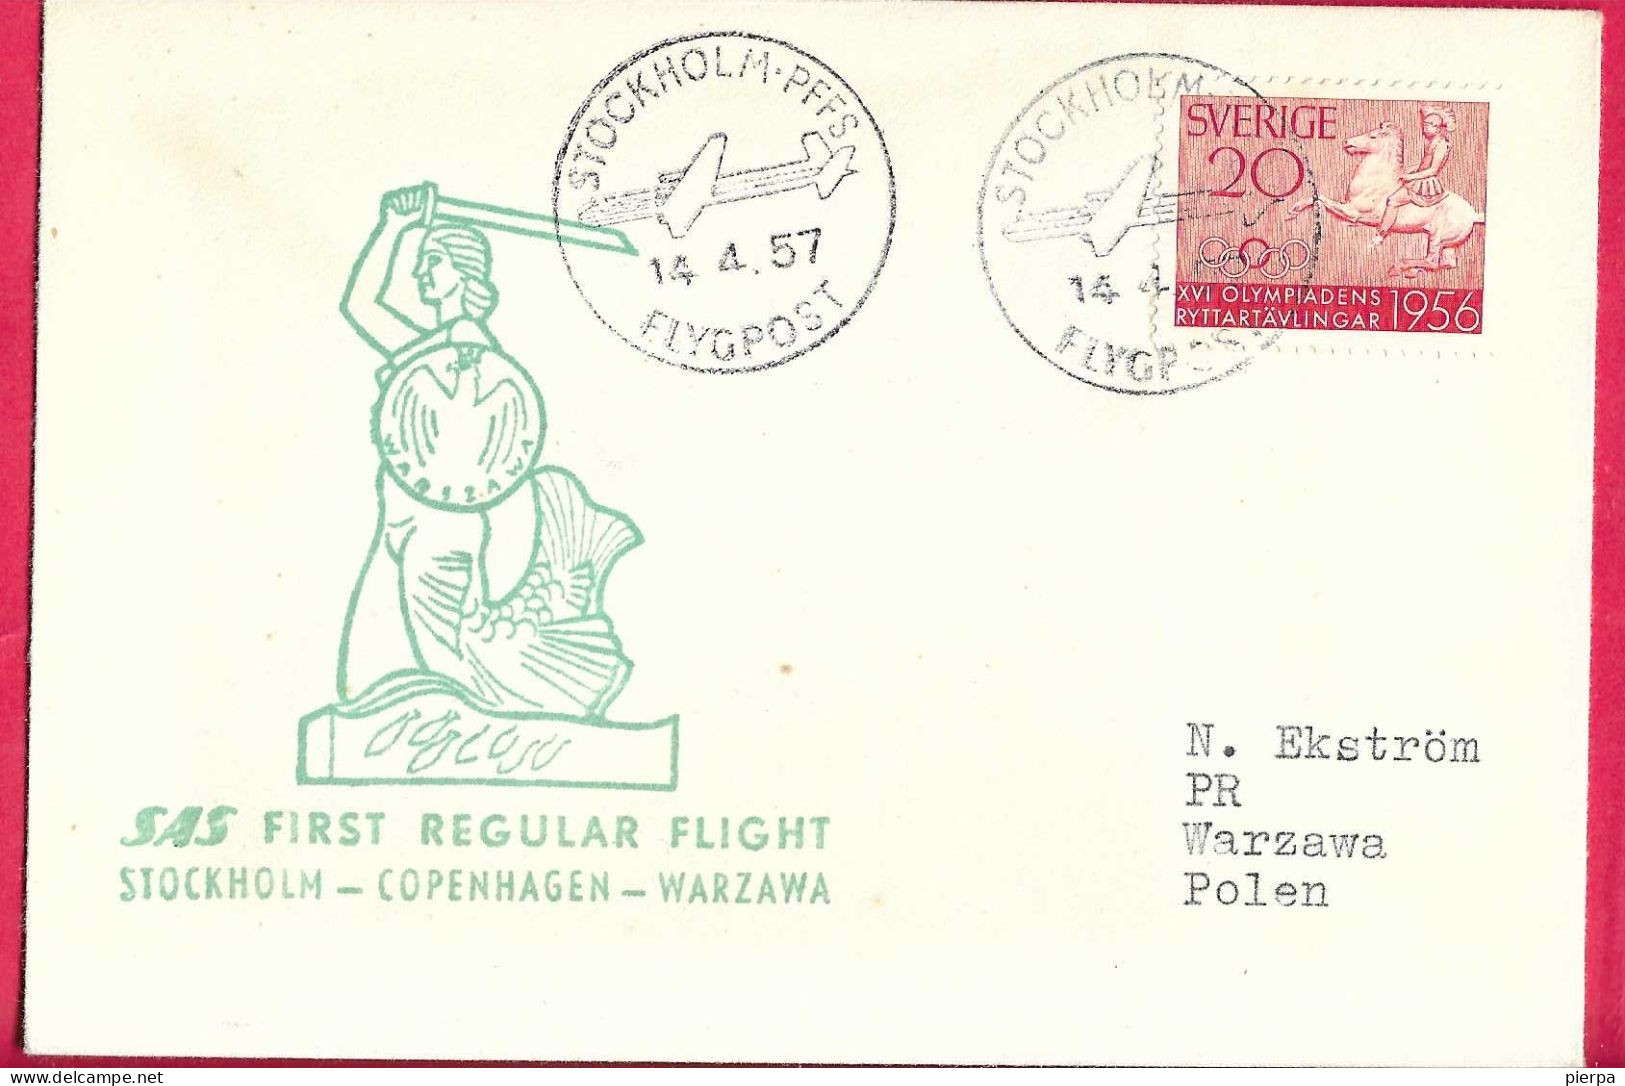 SVERIGE - FIRST REGULAR FLIGHT SAS  FROM STOCKHOLM TO WARZAWA *14.4.57* ON OFFICIAL COVER - Storia Postale